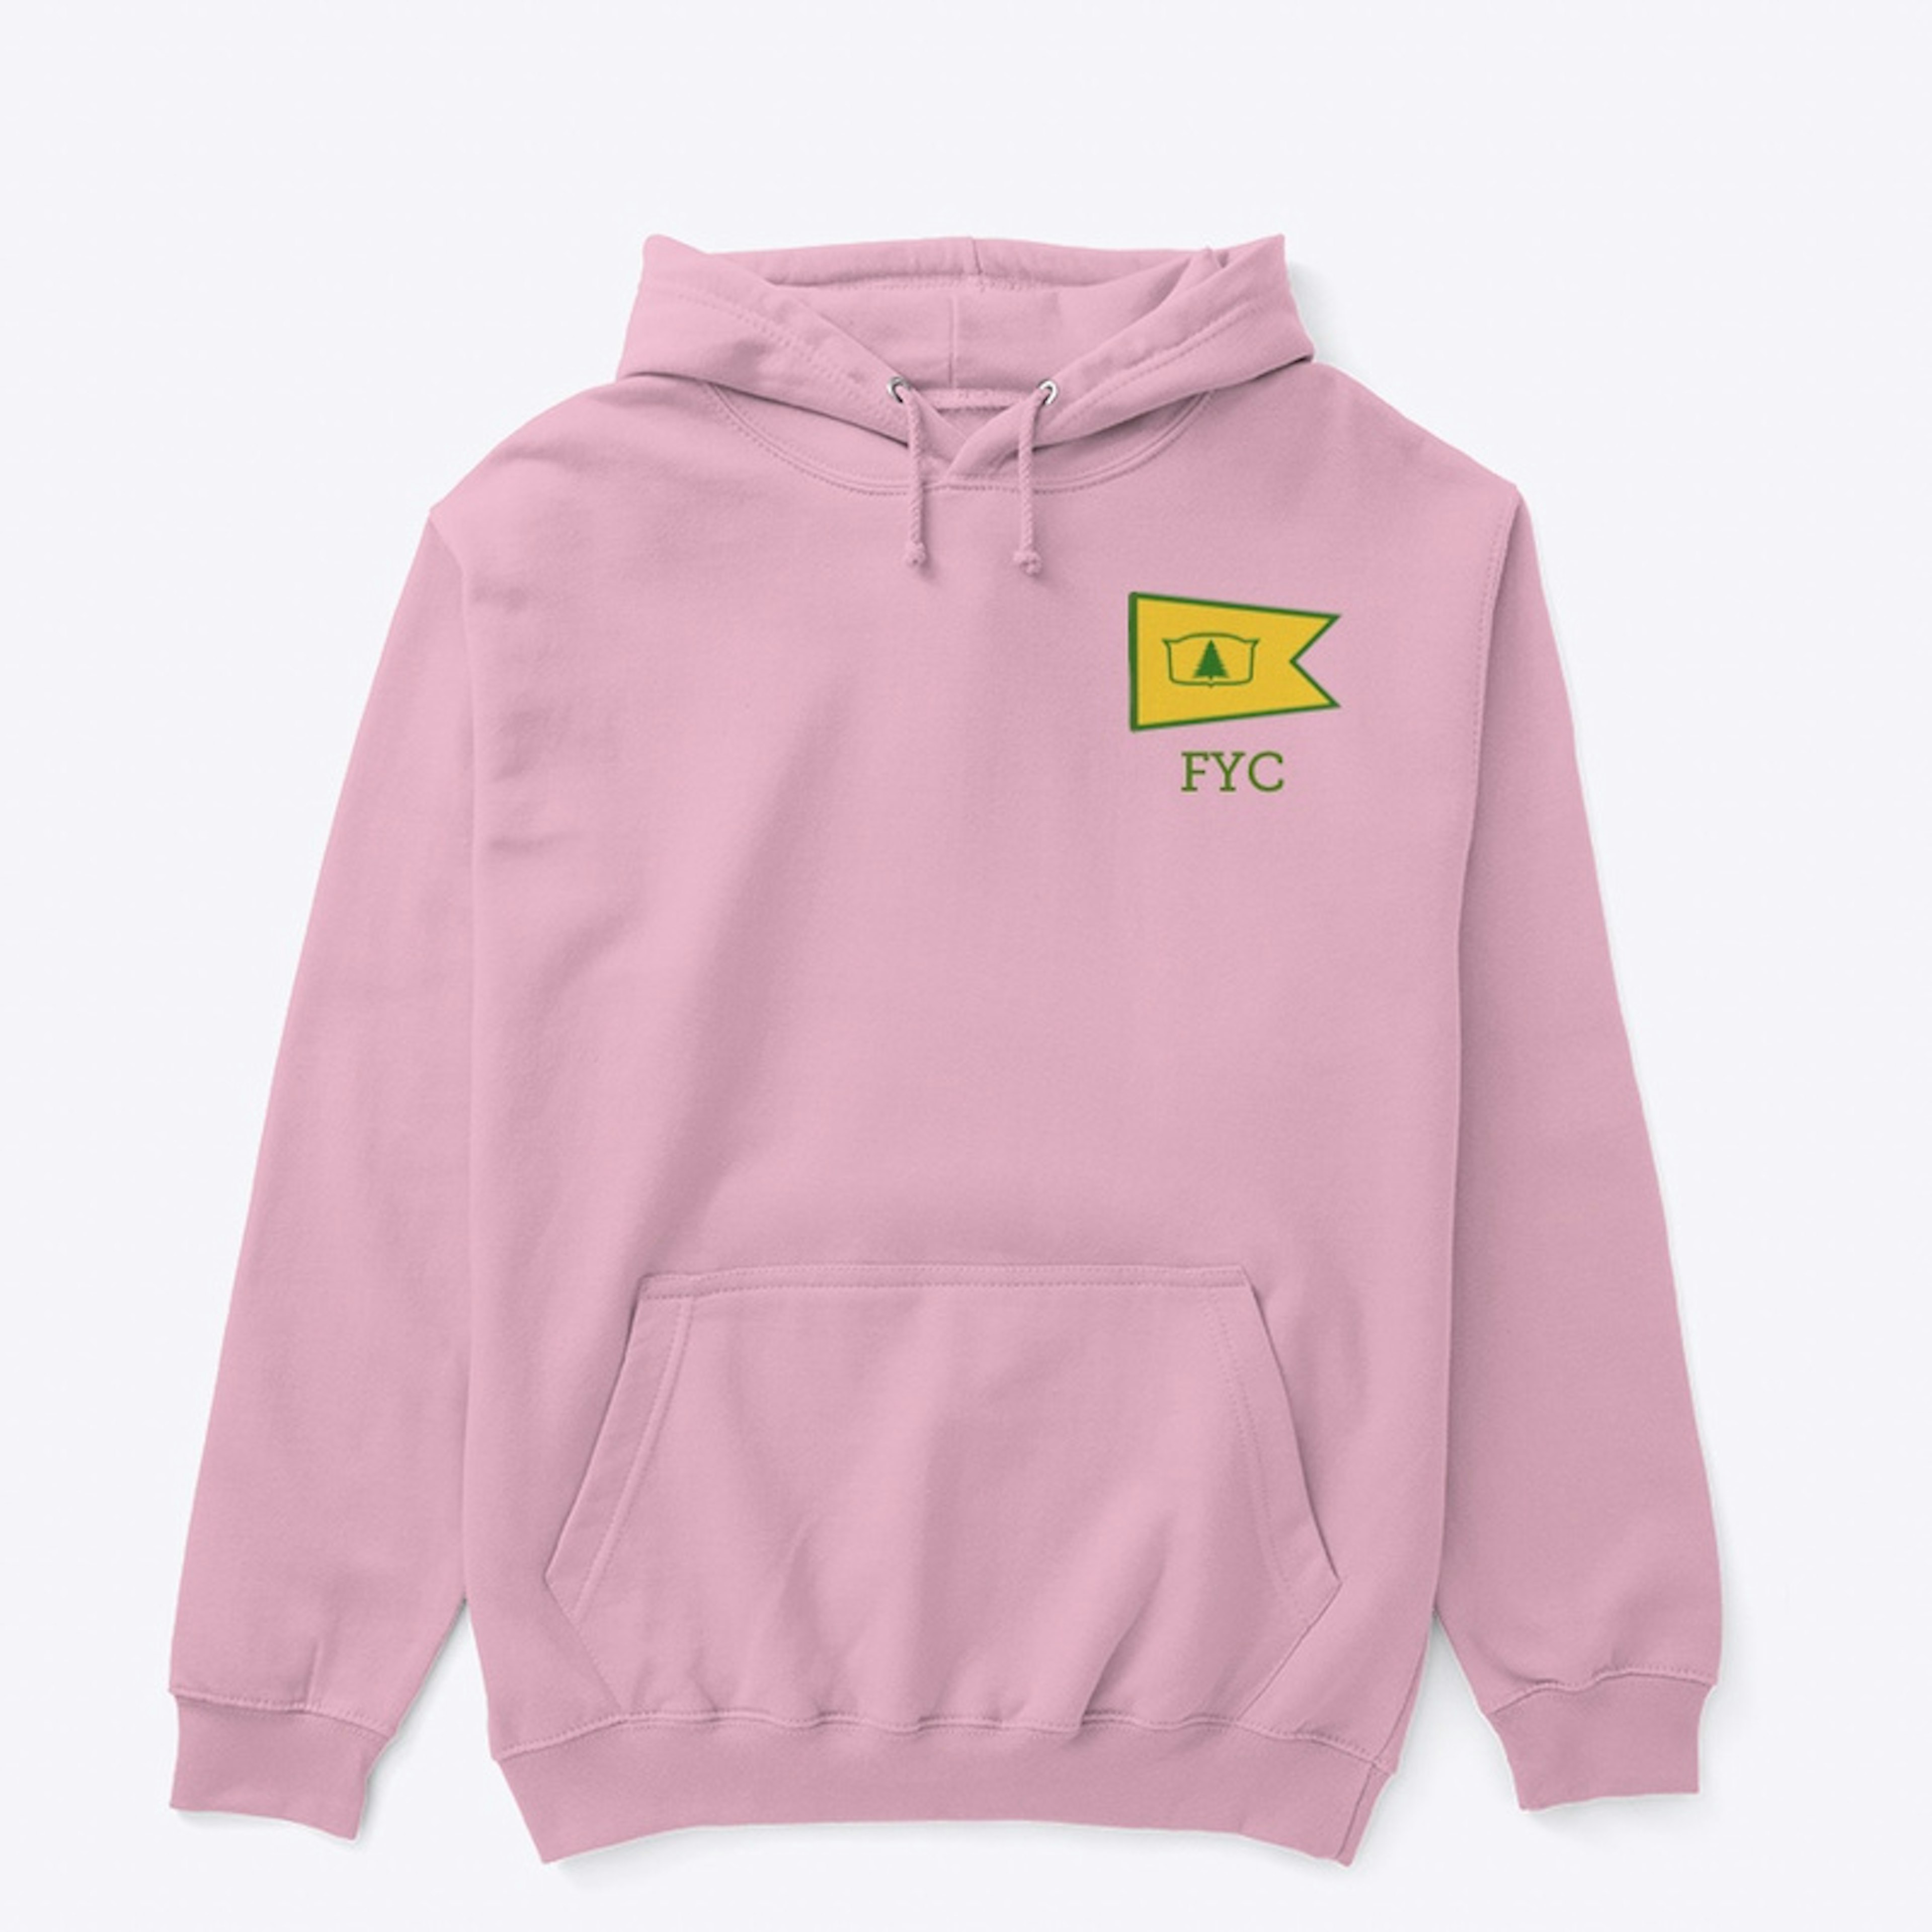 Woman's pull over hoodie